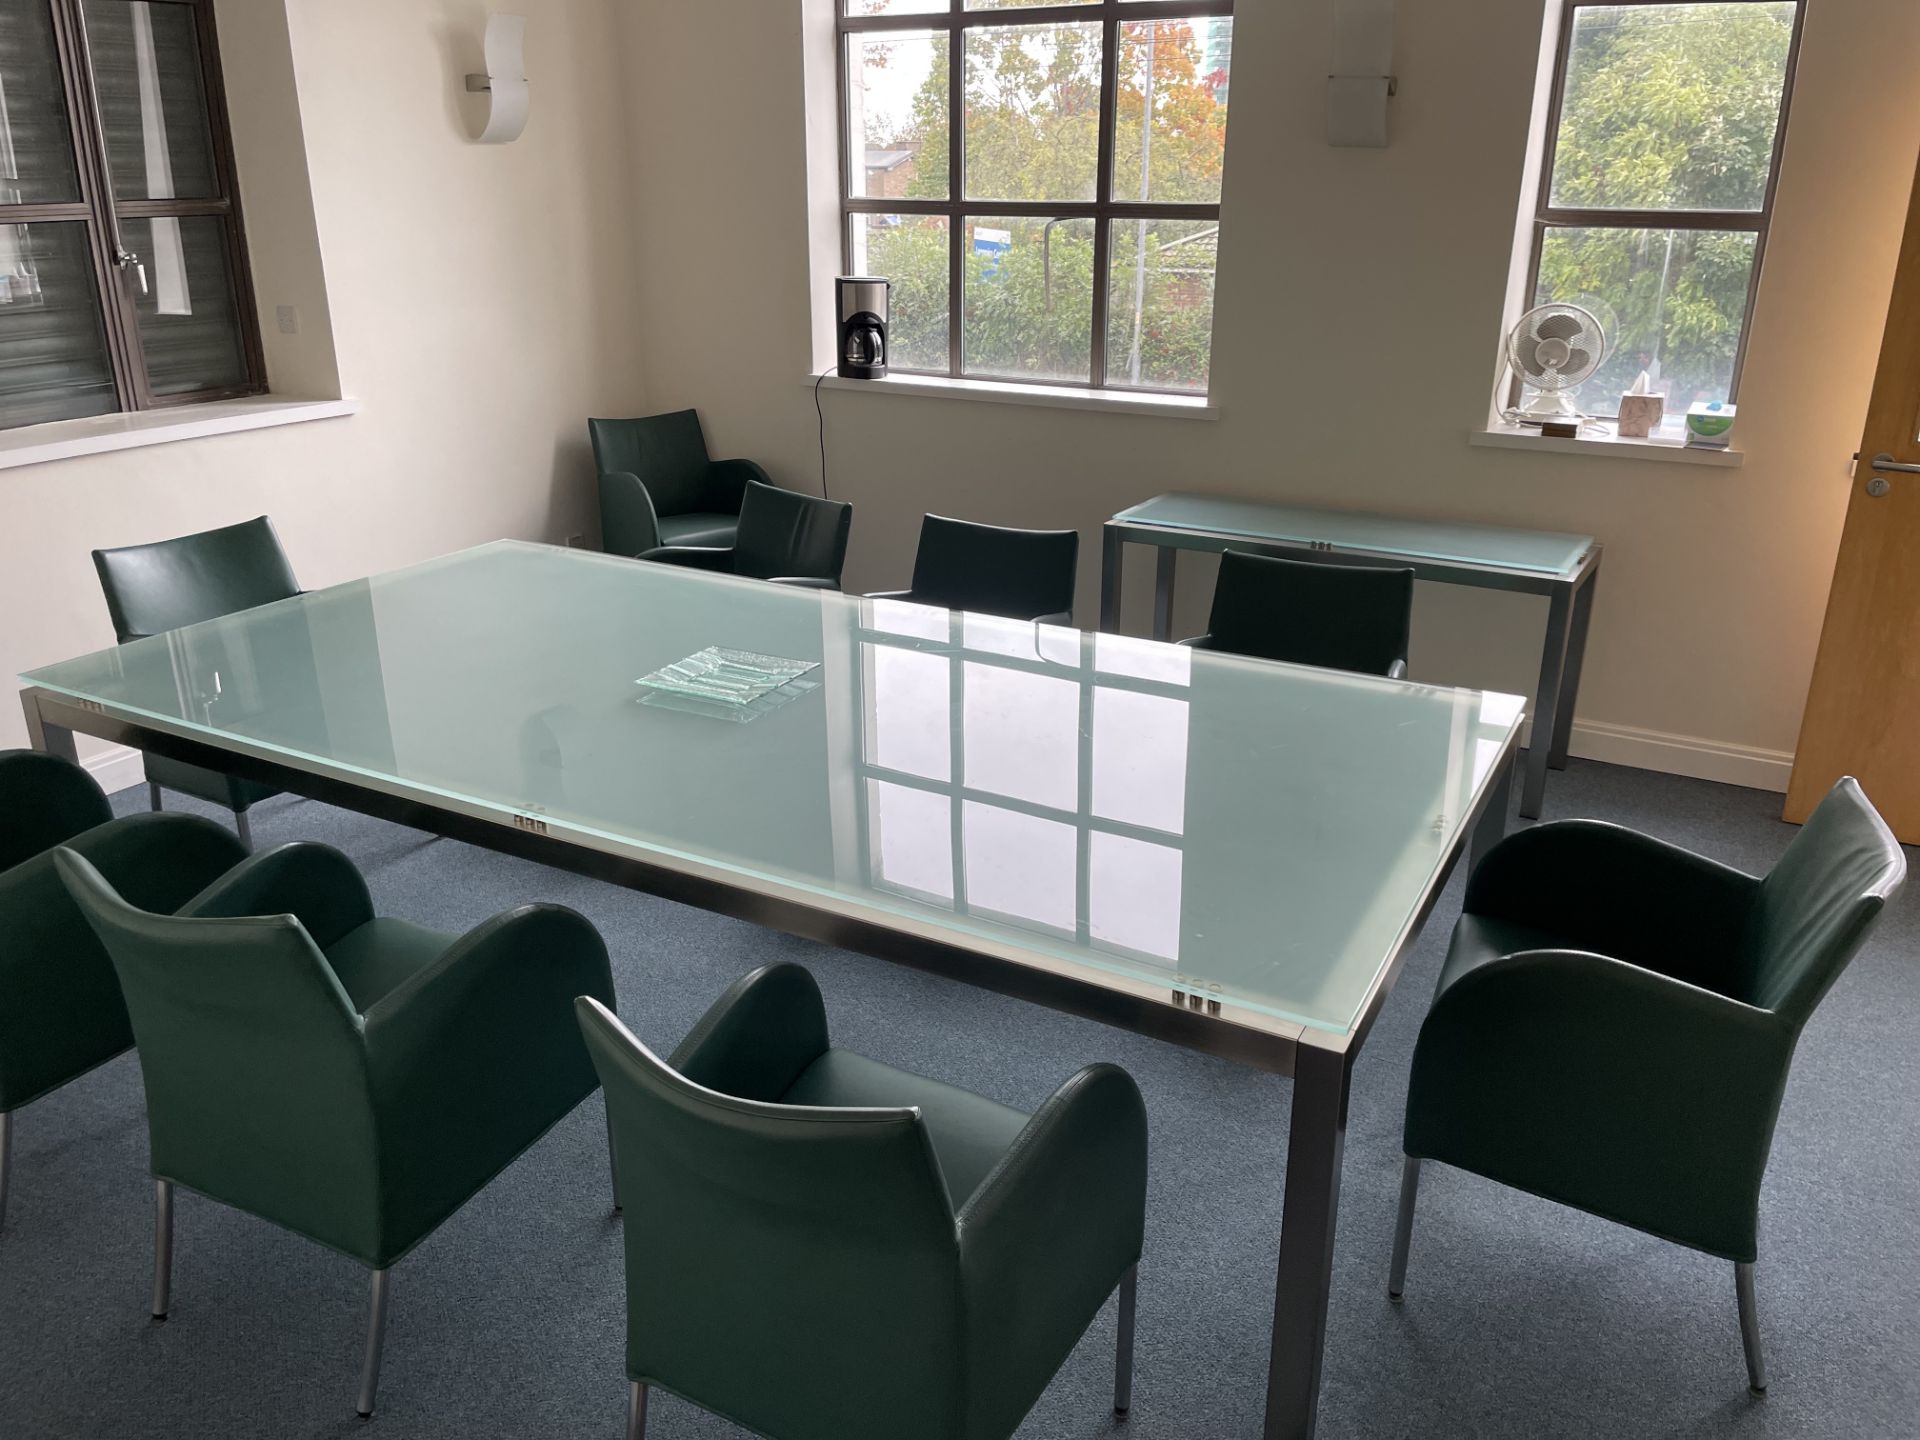 Boardroom table with 10 chairs (without contents) - Image 12 of 14